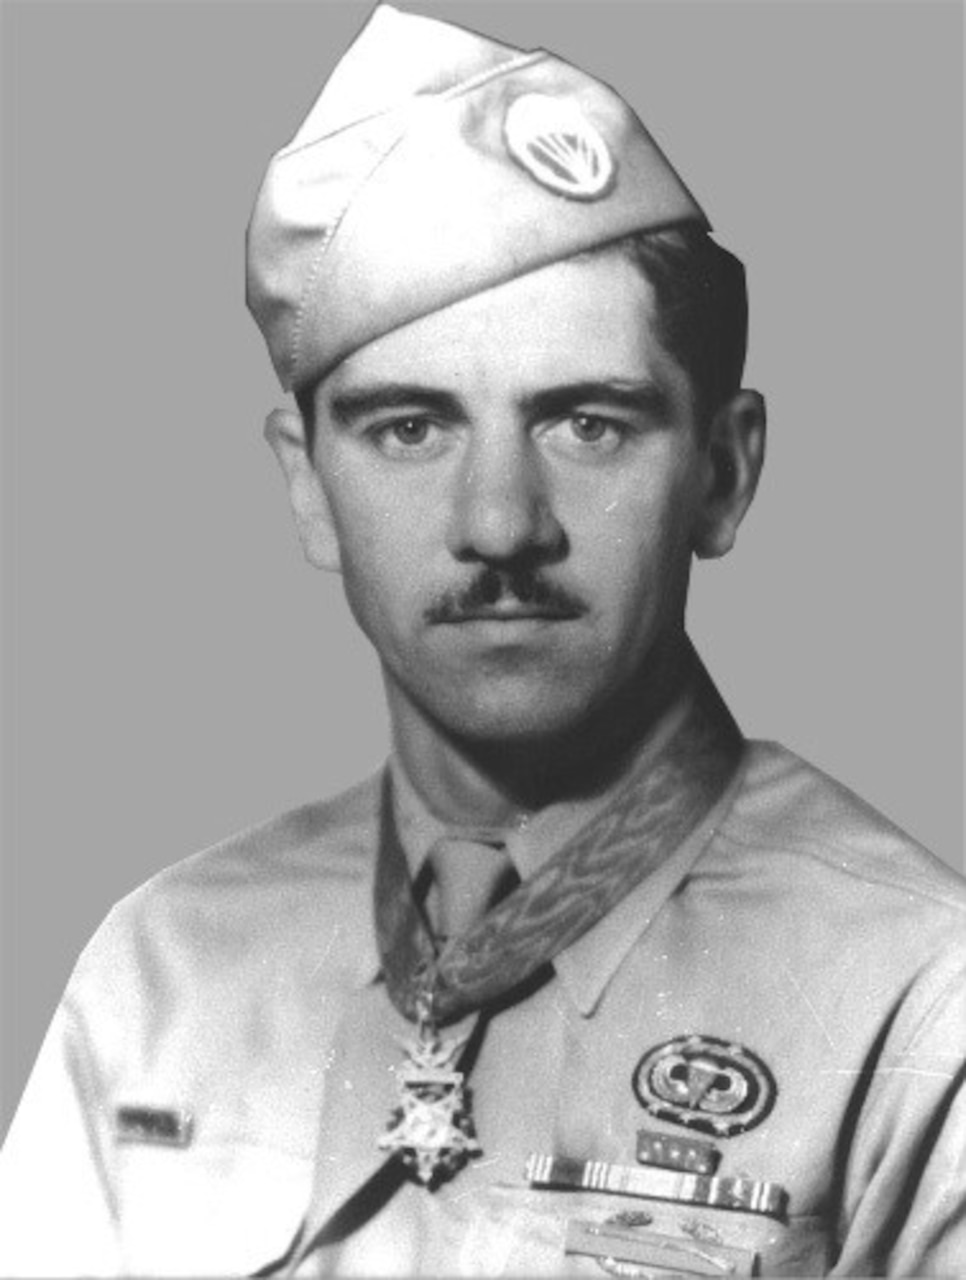 A man in uniform wears a medal around his neck.